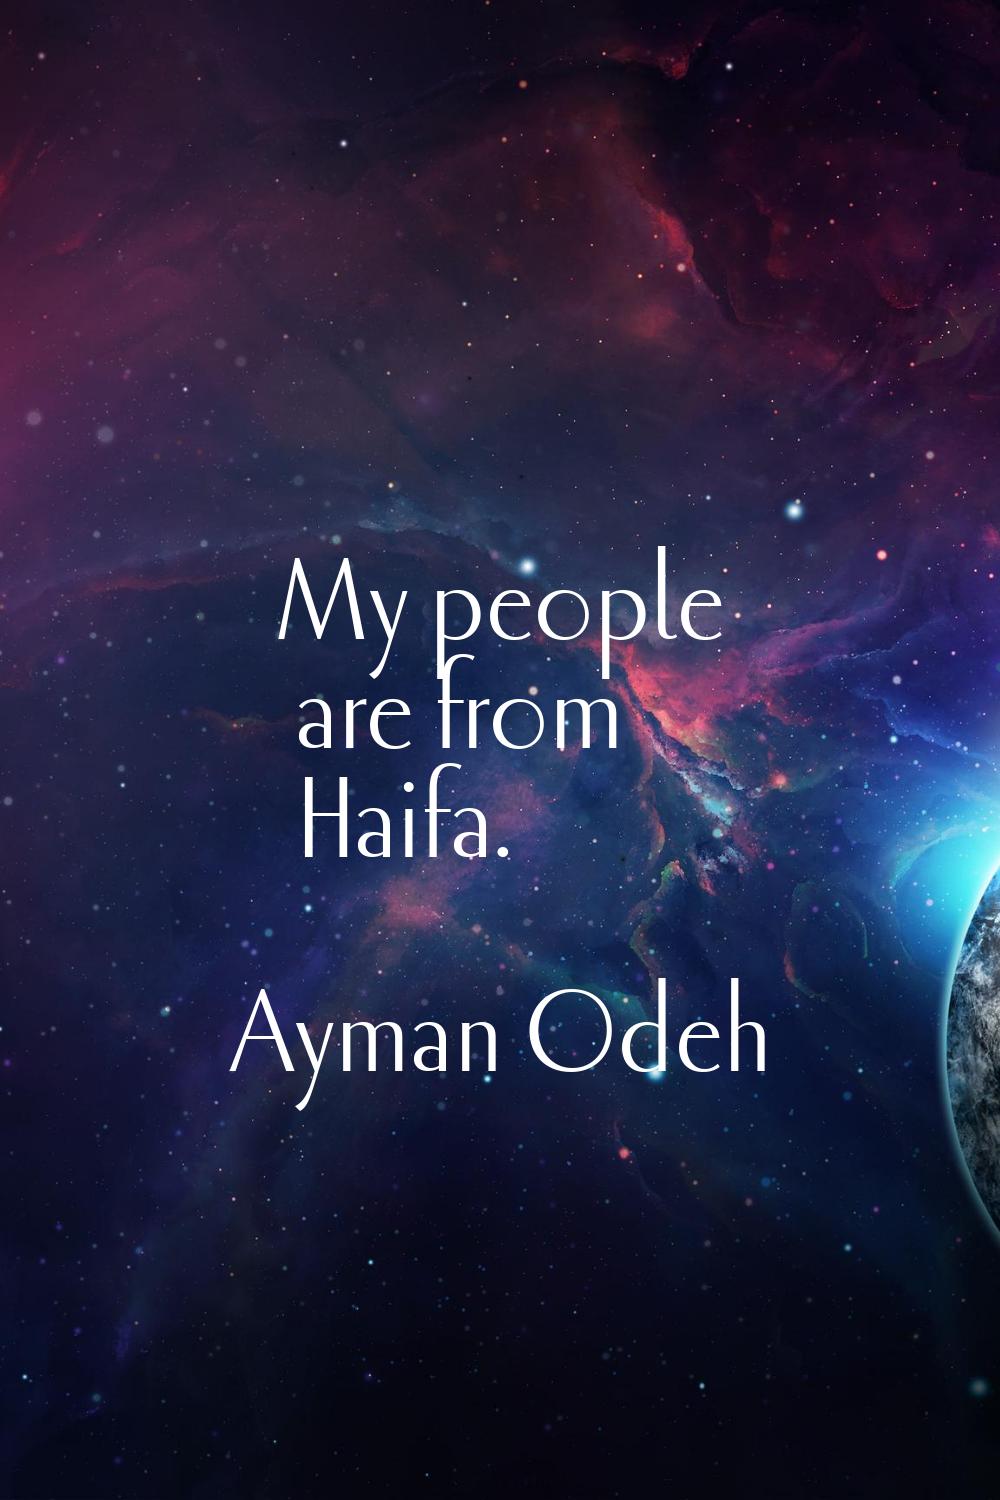 My people are from Haifa.